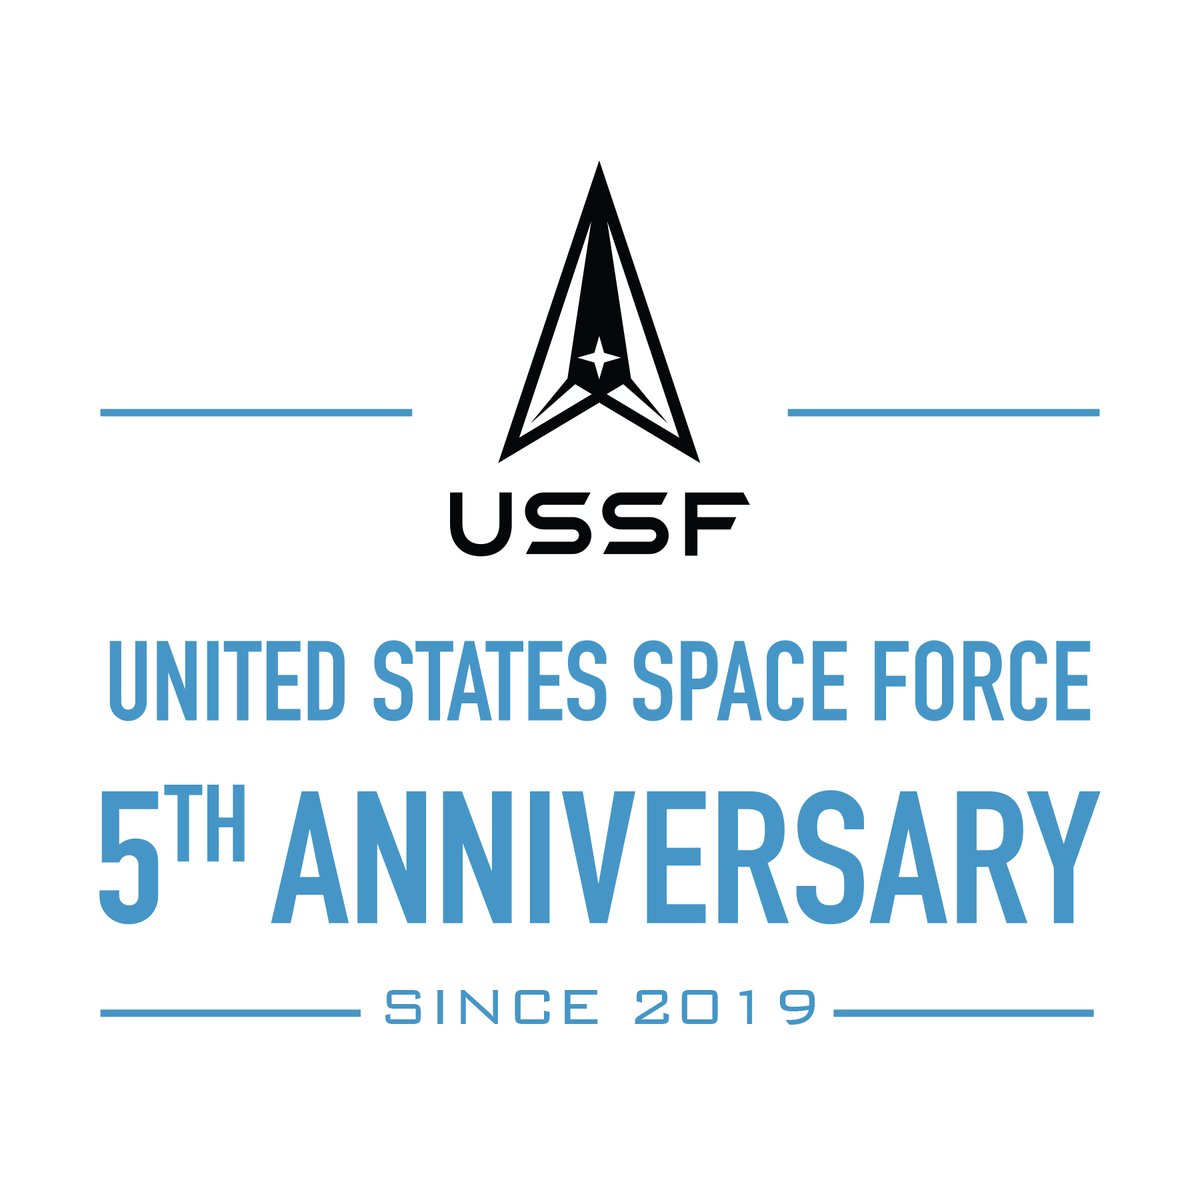 As the Space Force enters its 5th year, we remain dedicated as ever to proudly secure our nation’s interests in, from and to space by protecting the security  & prosperity Americans derive from space-based capabilities which are woven into the fabric of our daily lives. #USSF5